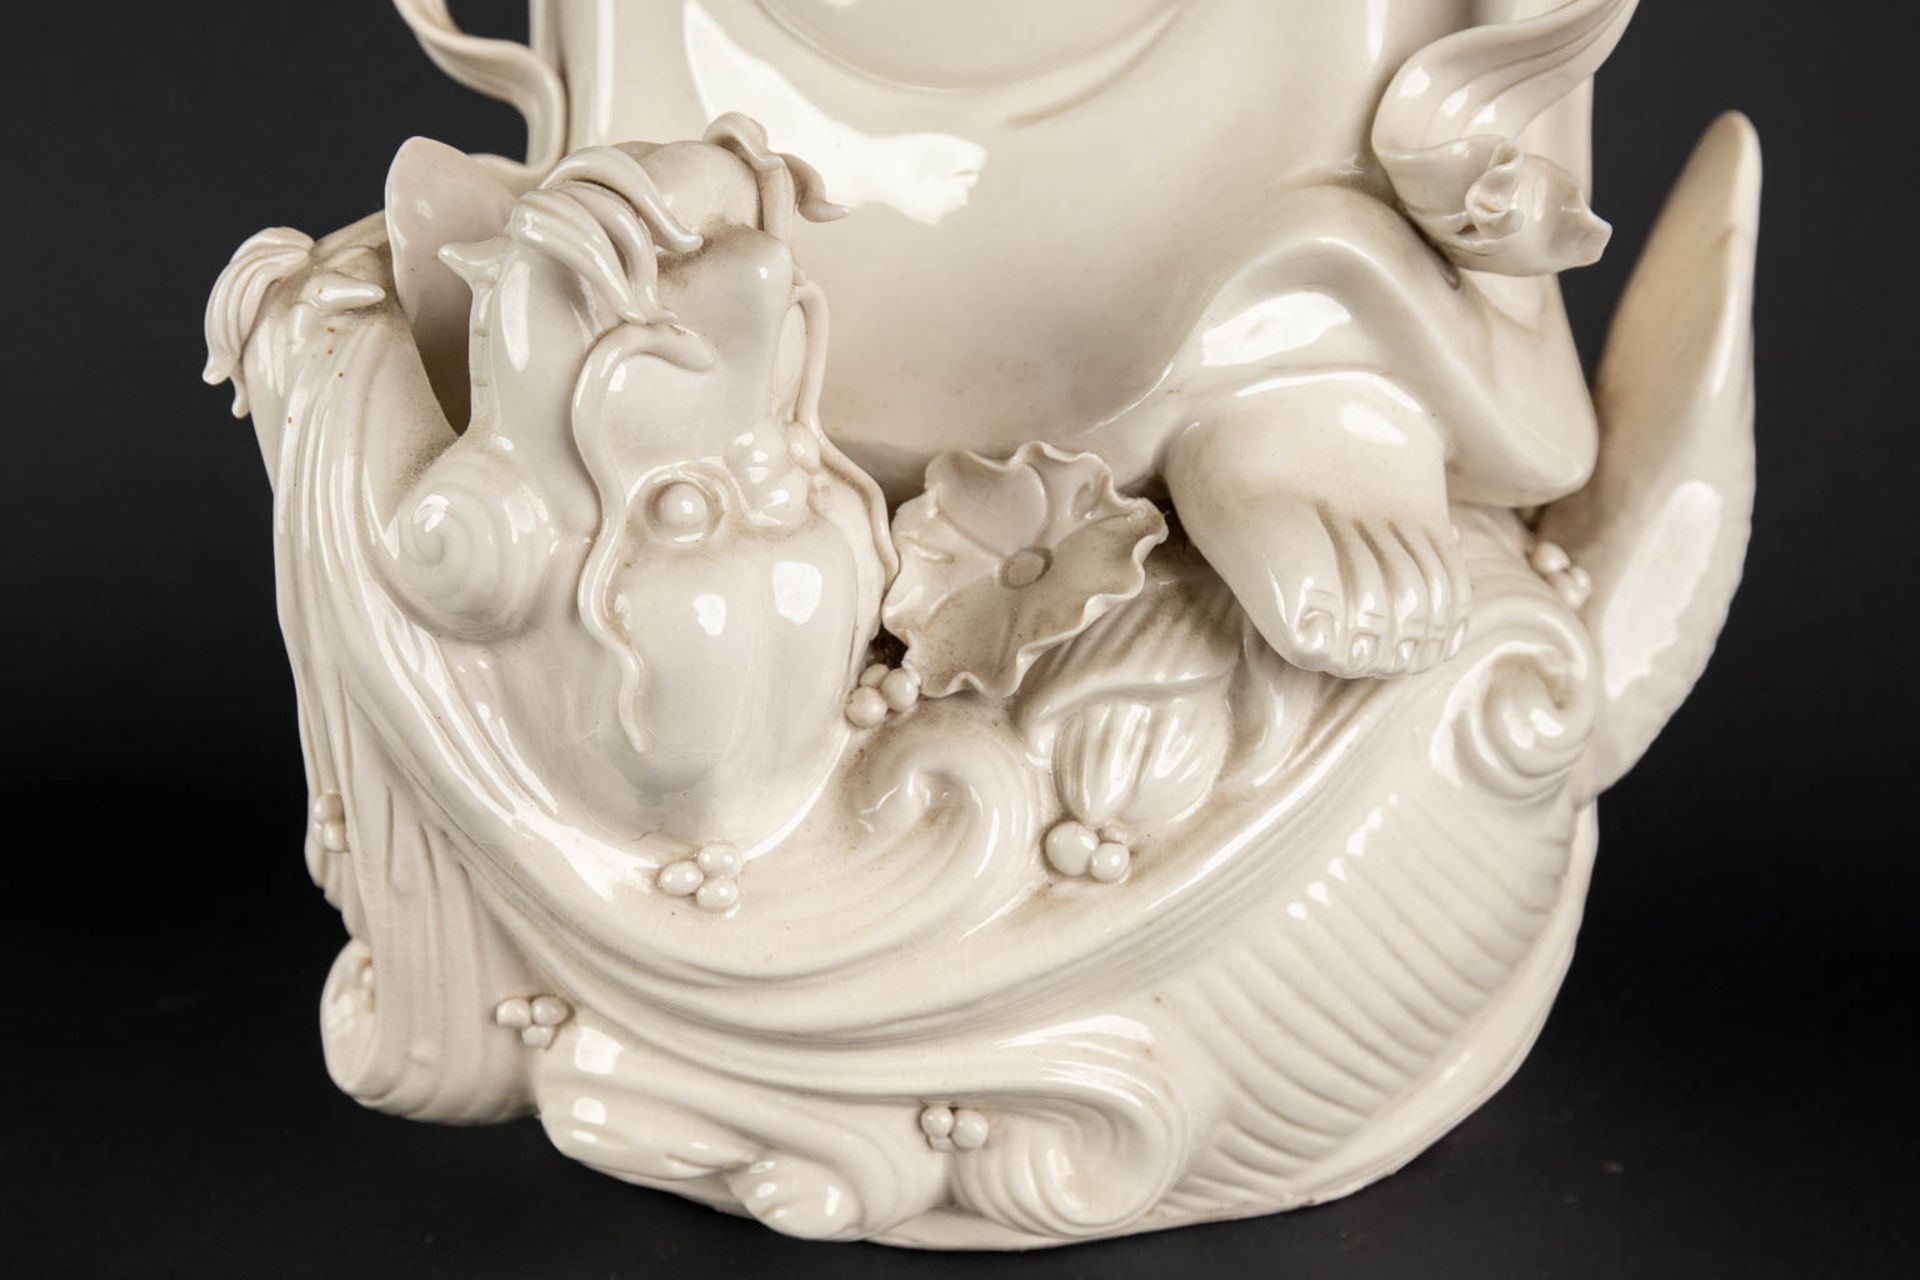 A large Chinese Guanyin figurine, blanc de chine porcelain. 20th C. (D:20 x W:23 x H:80 cm) - Image 12 of 13